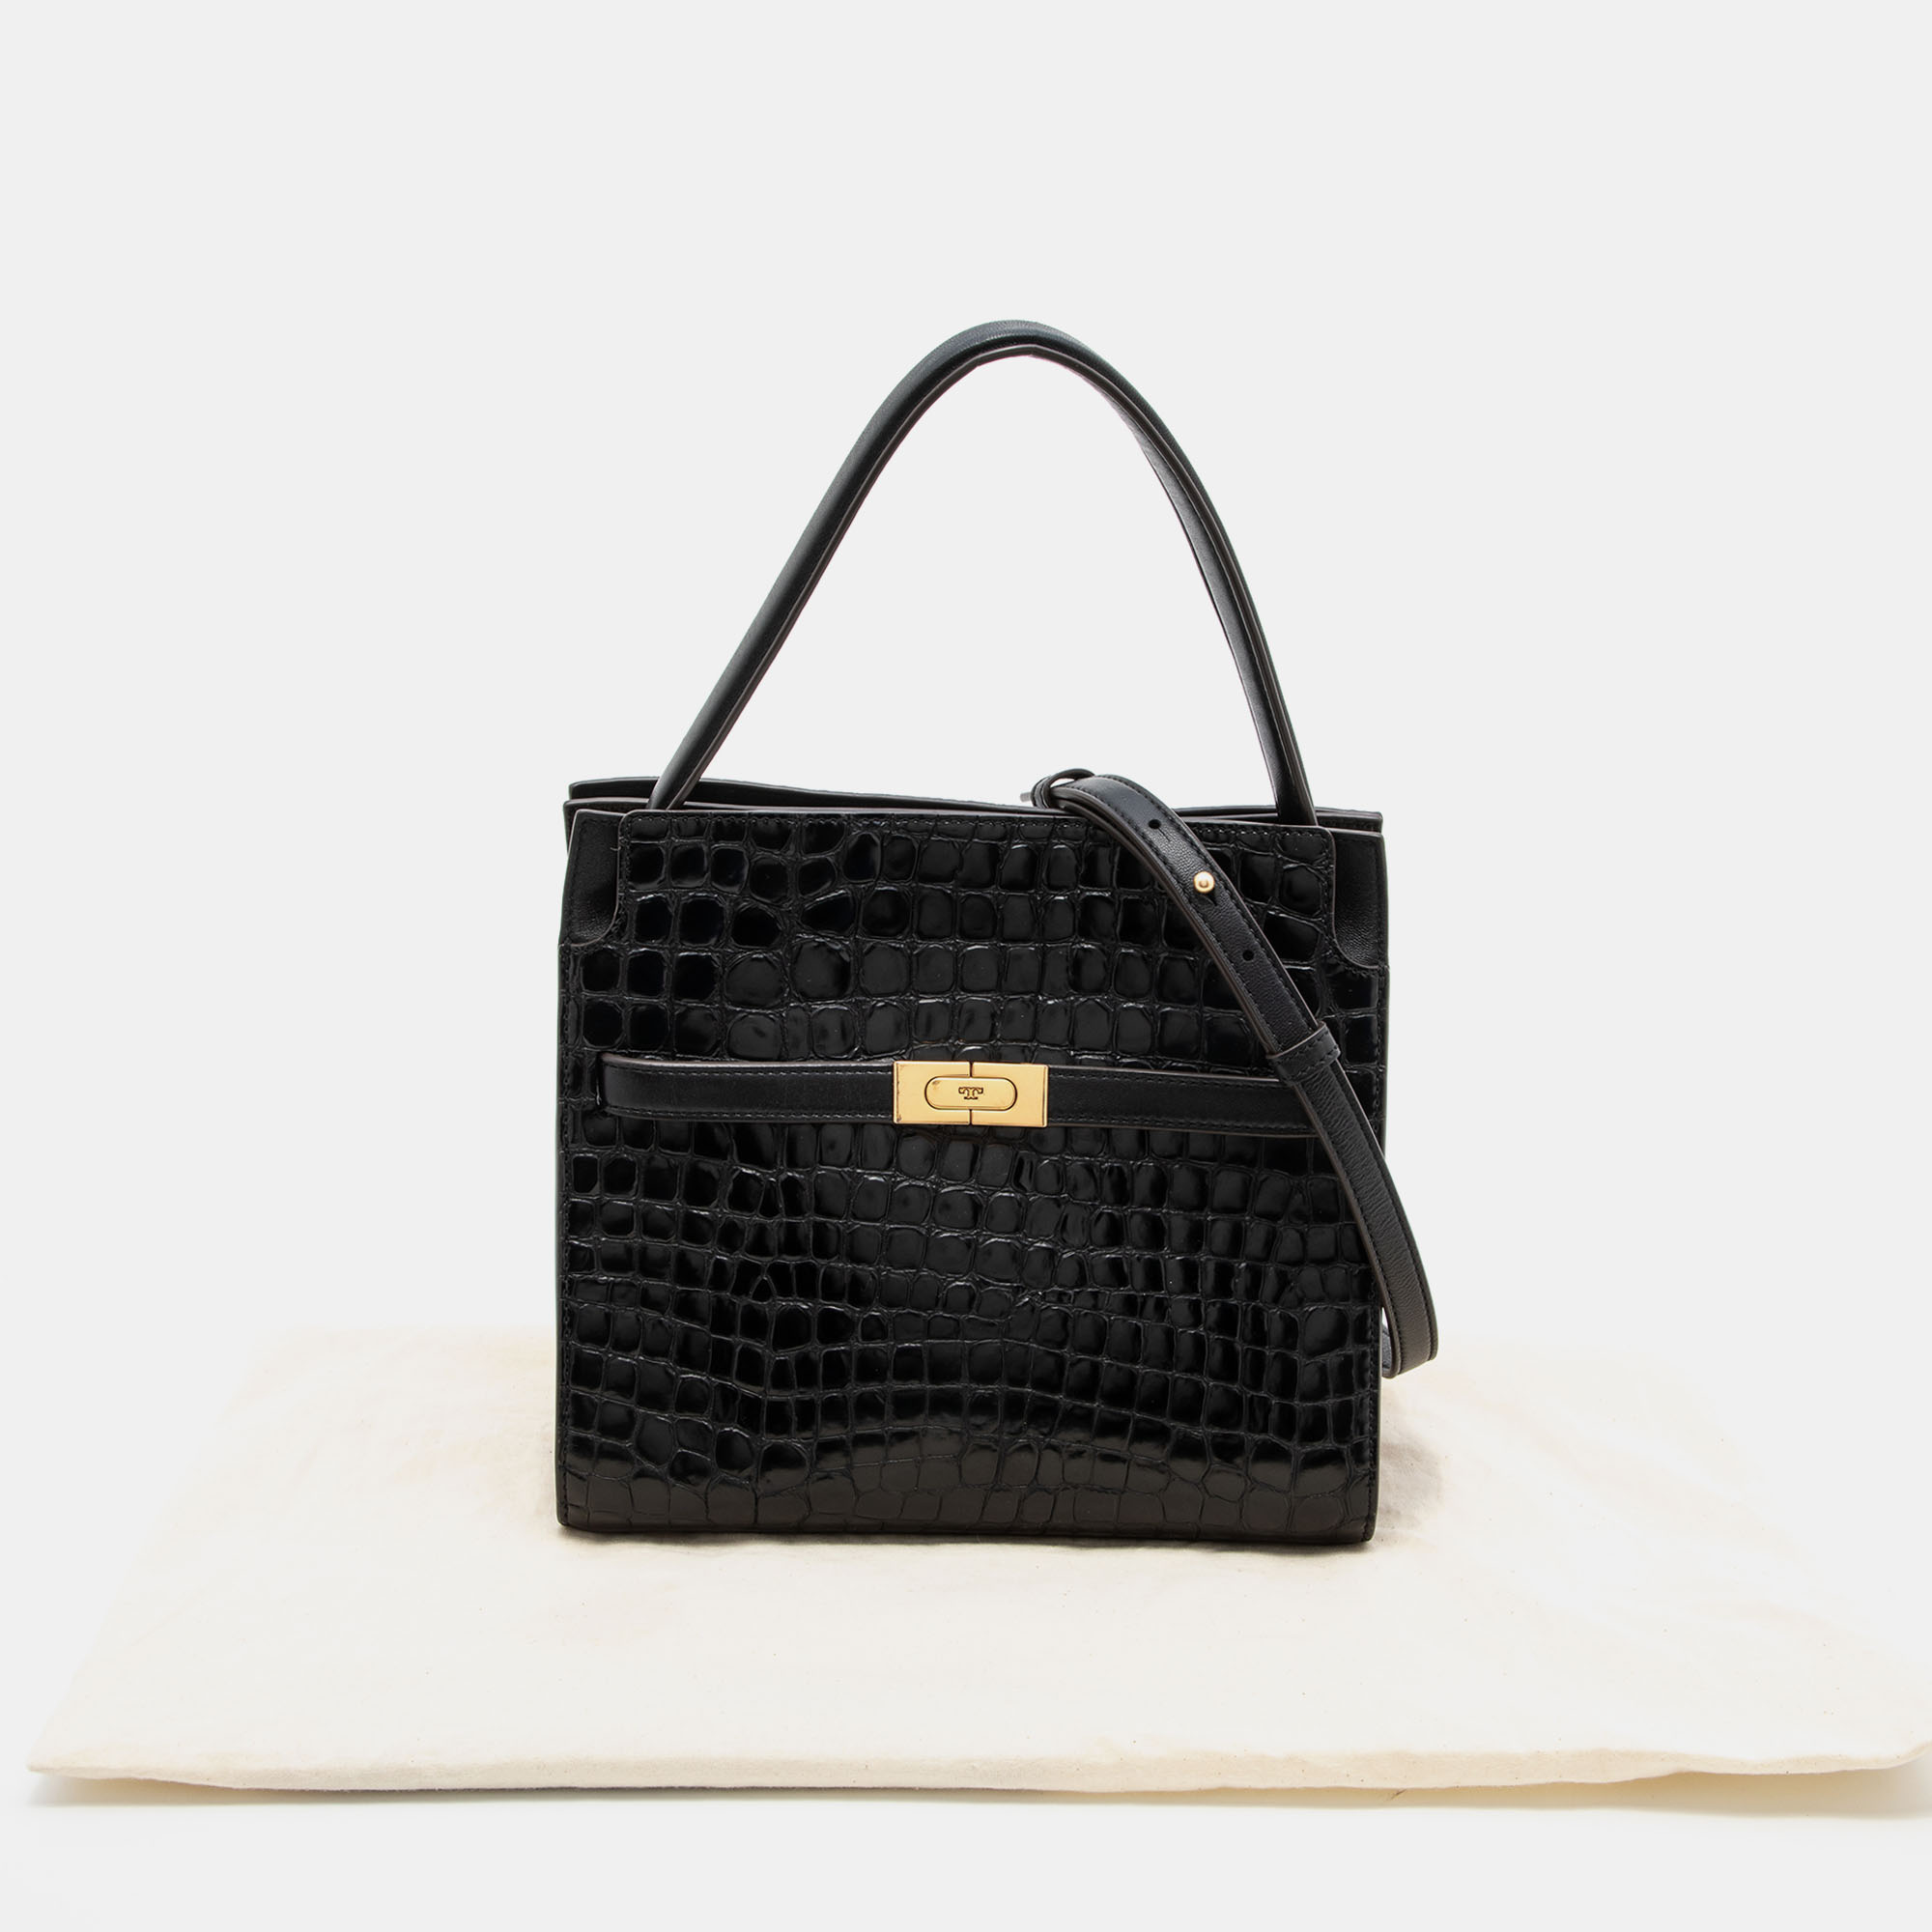 Tory Burch Black Croc Embossed Leather And Suede Small Lee Radziwill Double Bag